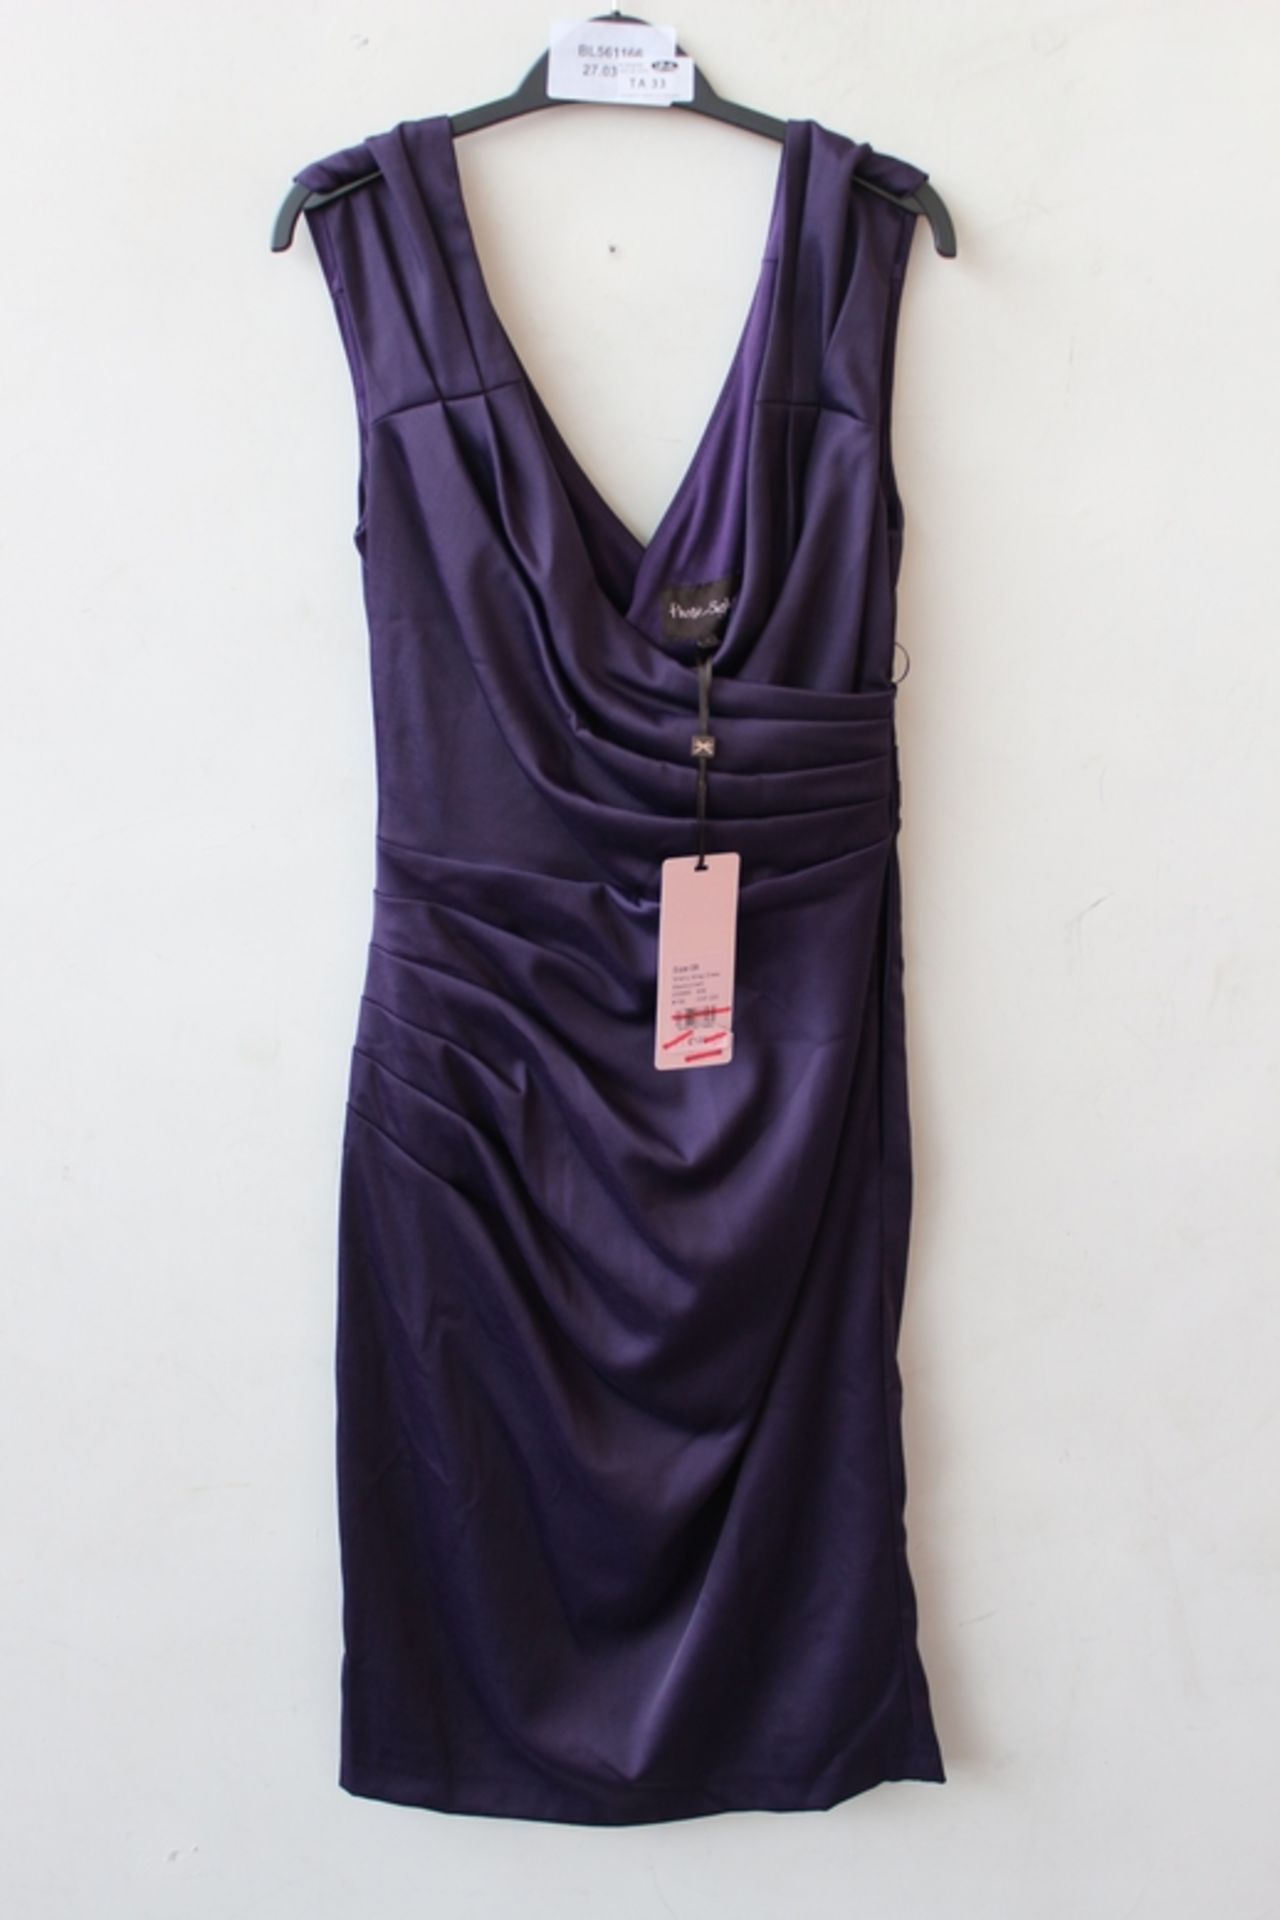 ONE PHASE 8 SHERRY WRAP DRESS SIZE 8 RRP £120 (BL561166)